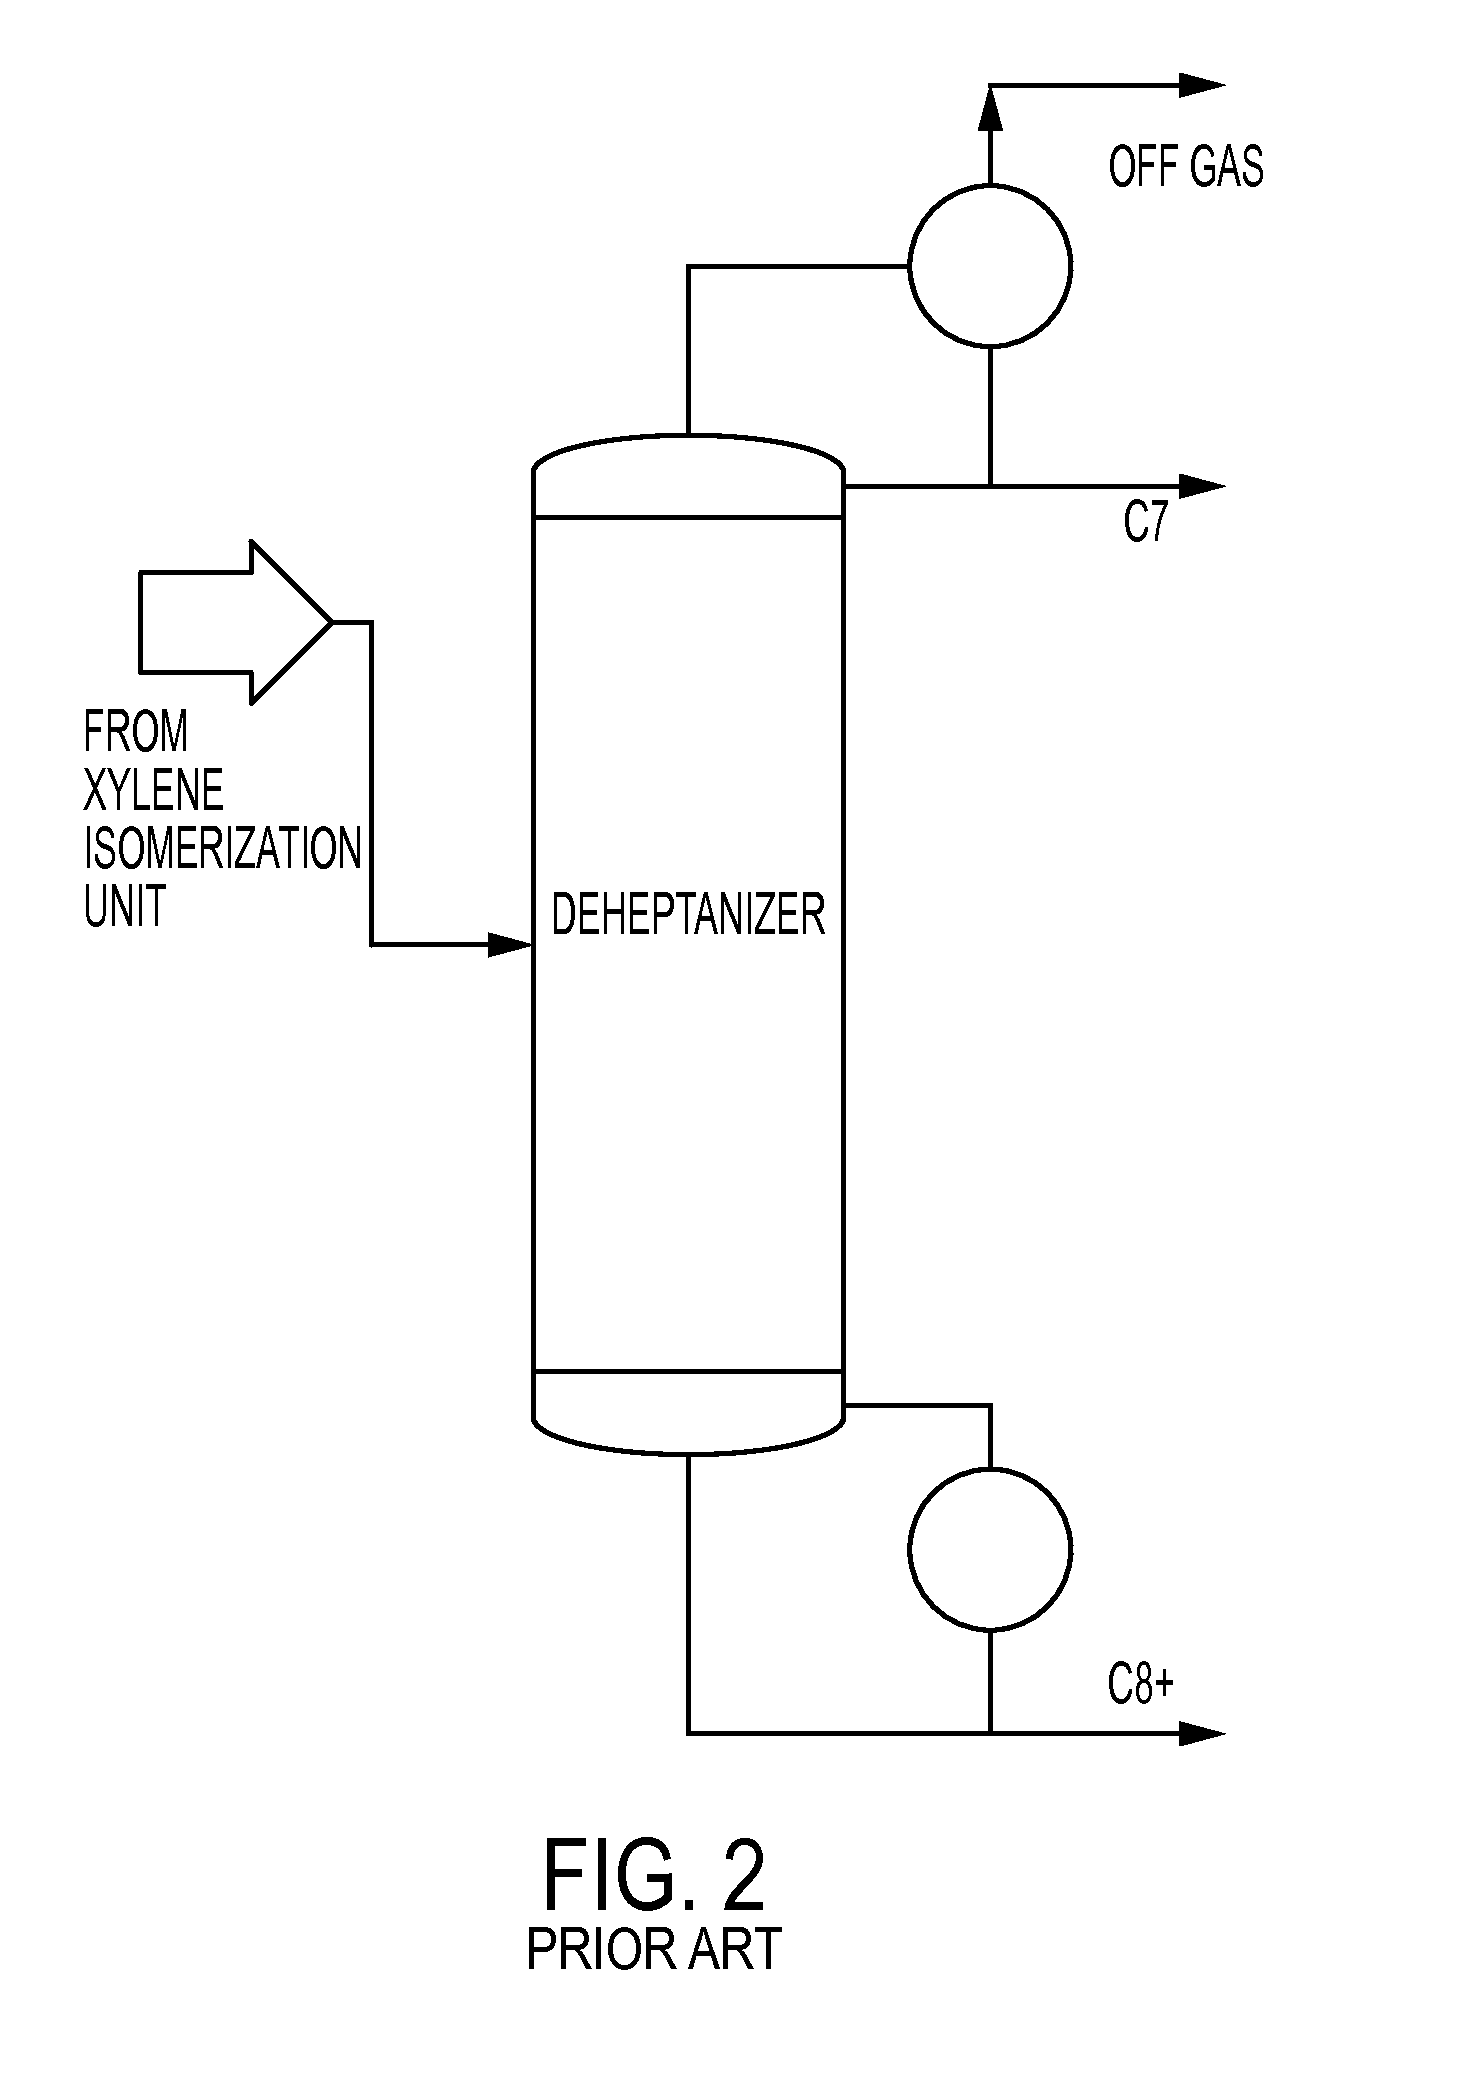 Method of carrying out absorption/distillation in a single column design